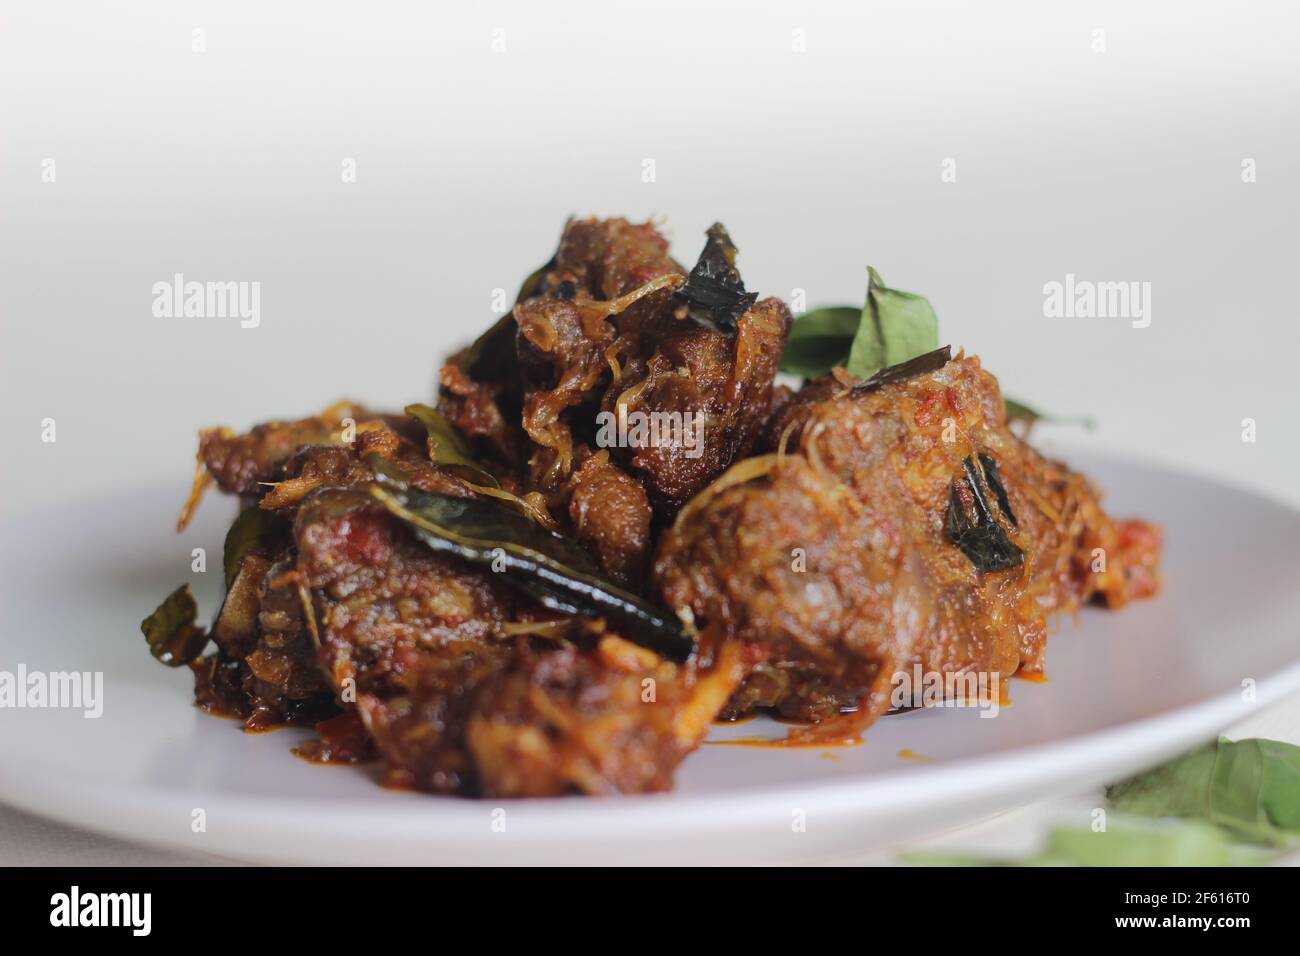 Kerala style mutton roast prepared with coconut oil. Shot on white background Stock Photo